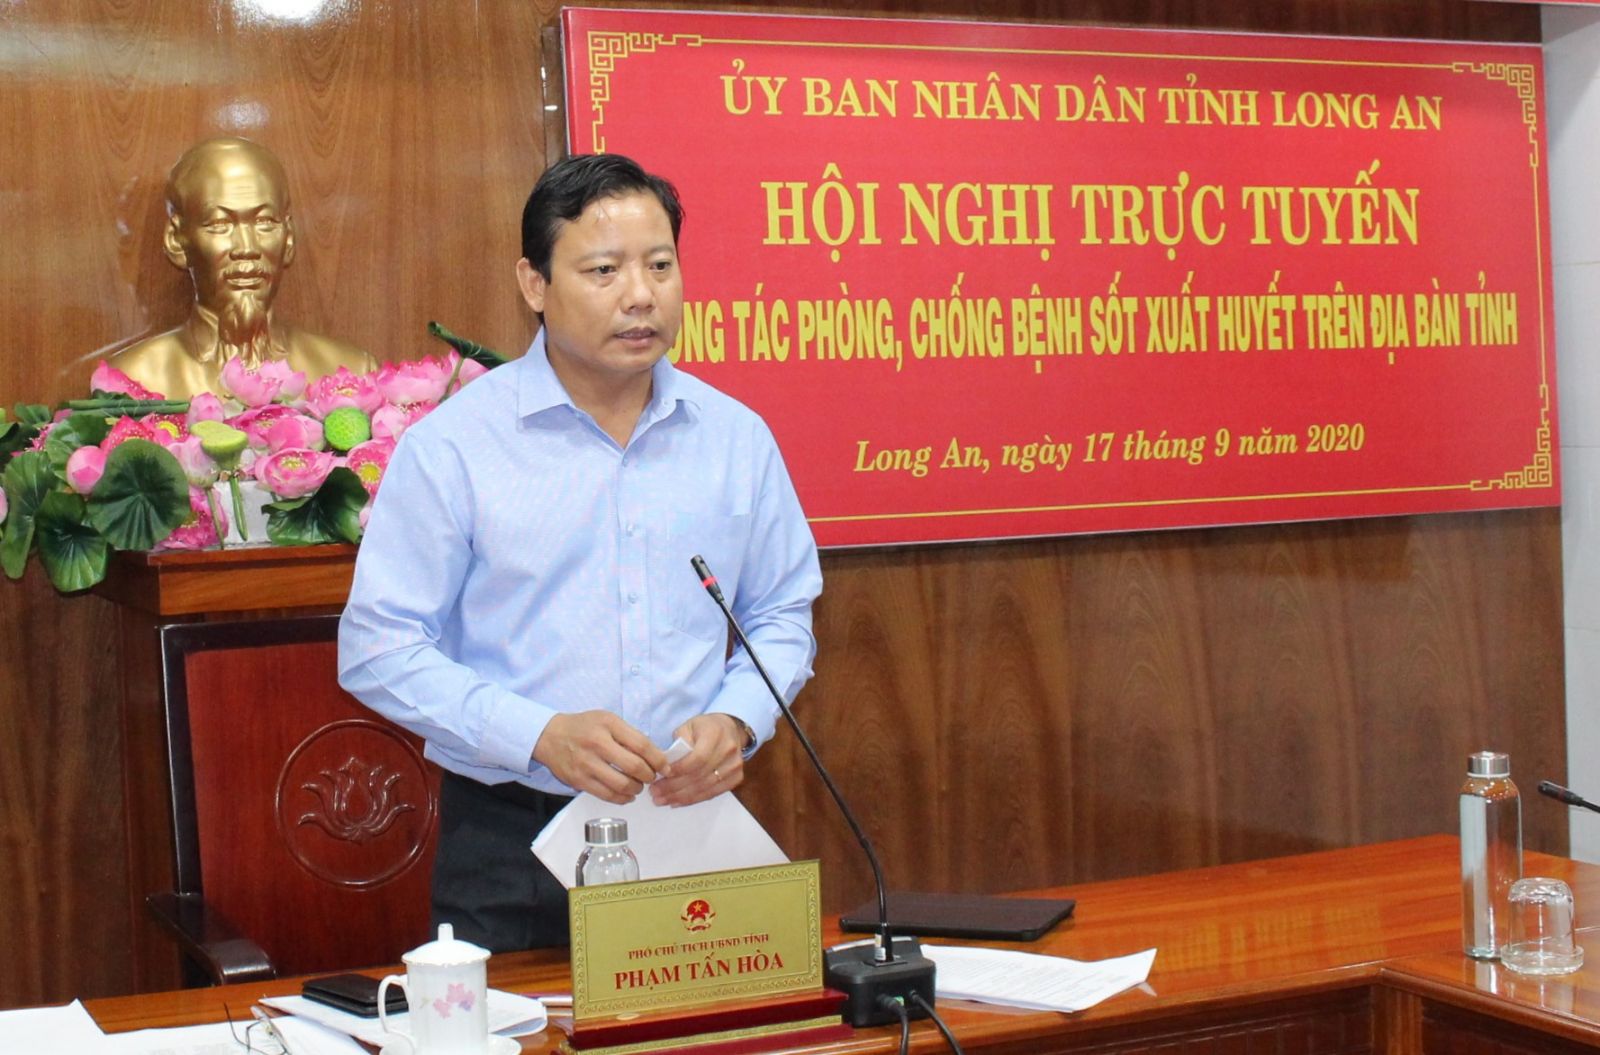 Vice Chairman of Long An People's Committee - Pham Tan Hoa suggests departments, sectors, unions and localities to strengthen measures to prevent and control dengue fever